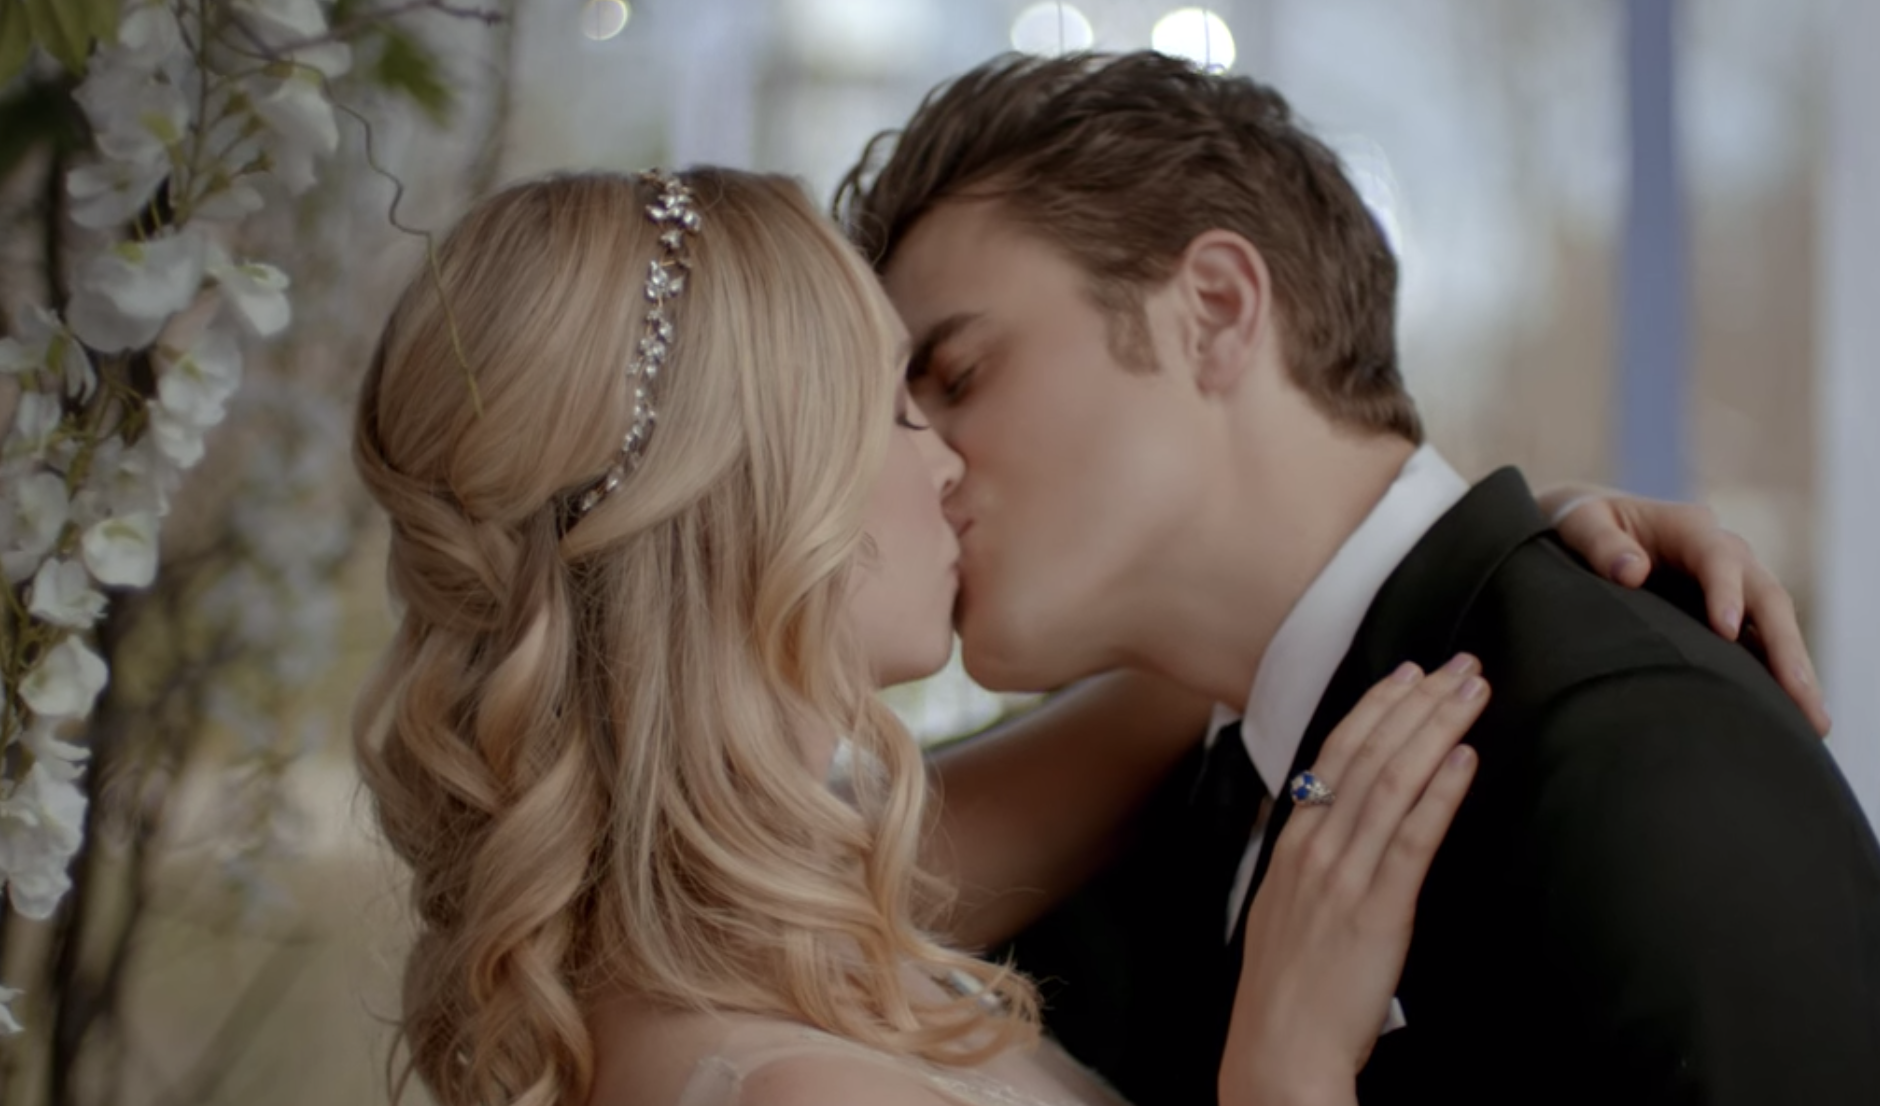 Carolie and Stefan kissing at the altar